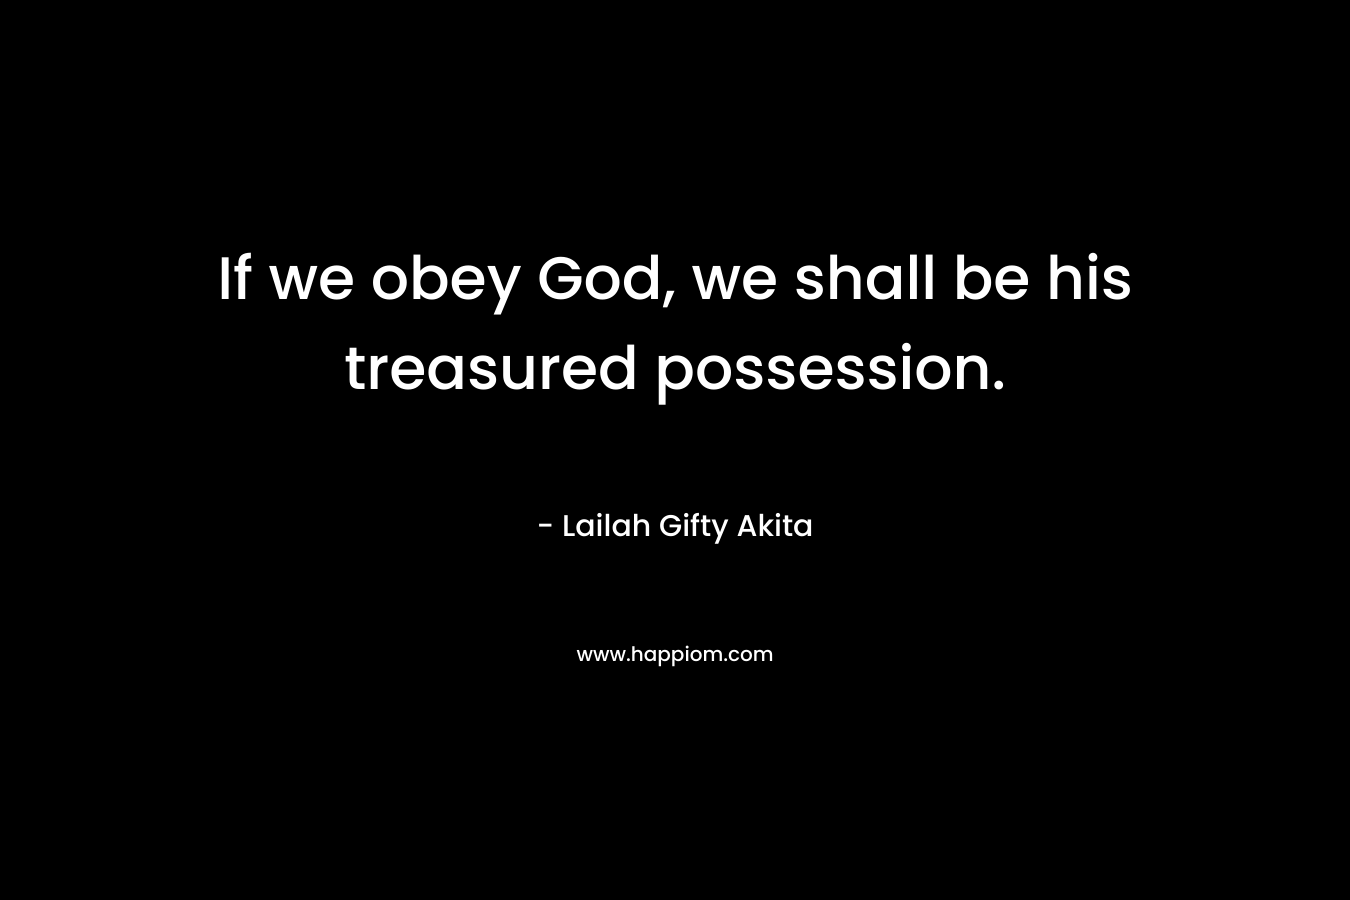 If we obey God, we shall be his treasured possession.